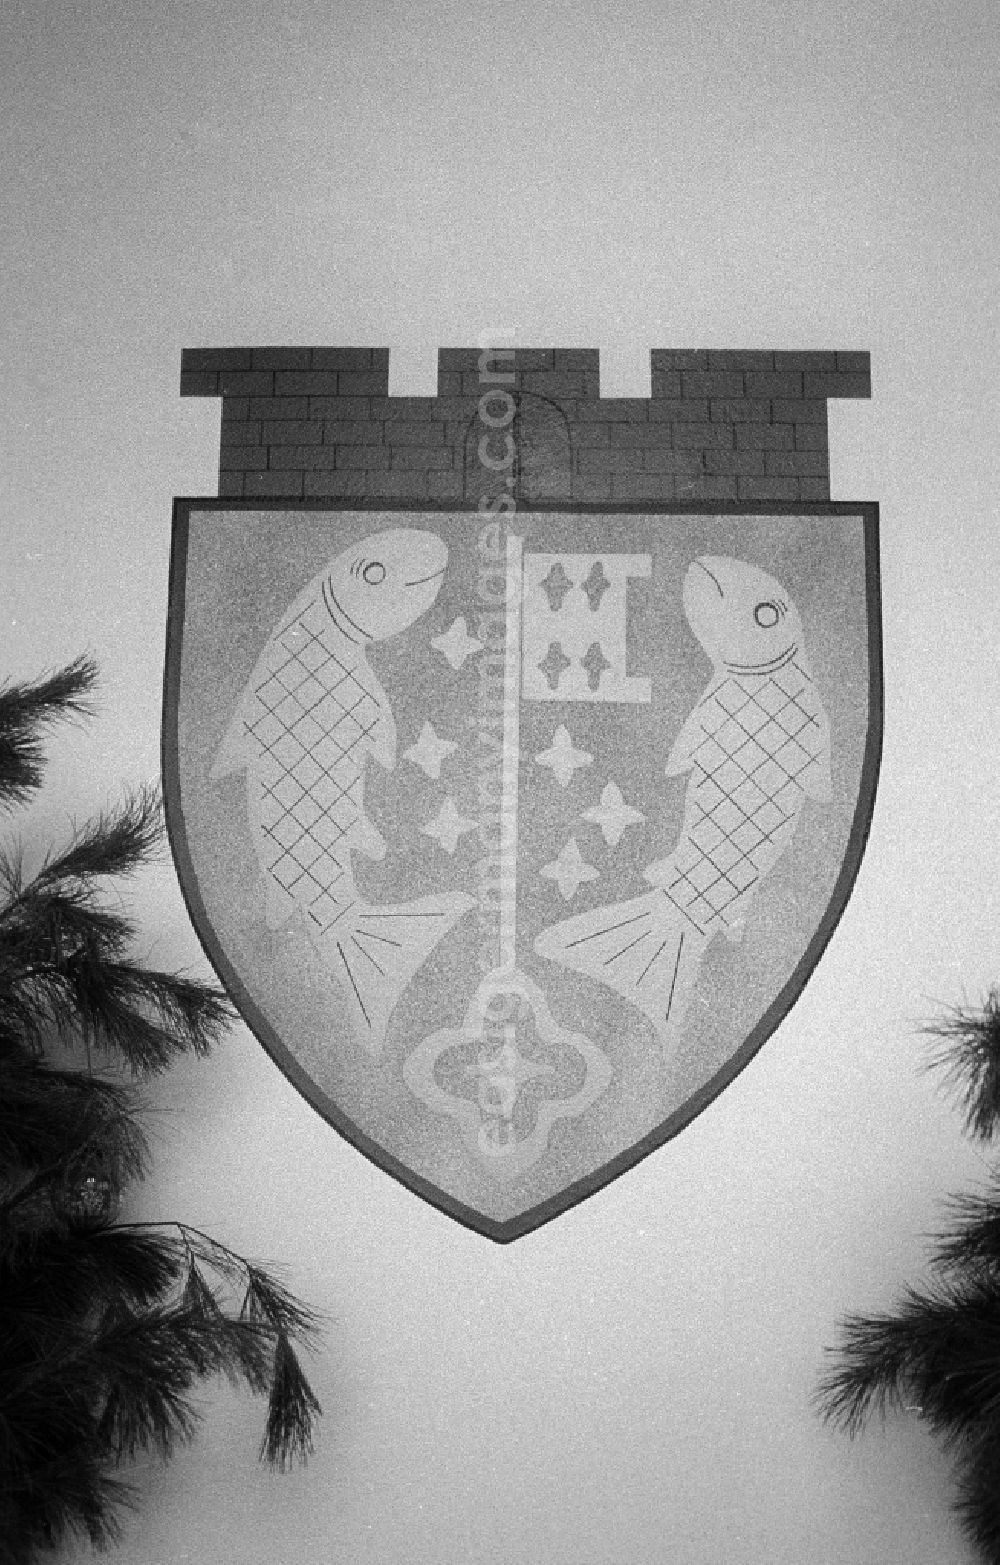 GDR photo archive: Berlin - Coats of arms of the district of Koepenick in Berlin, the former capital of the GDR, German democratic republic